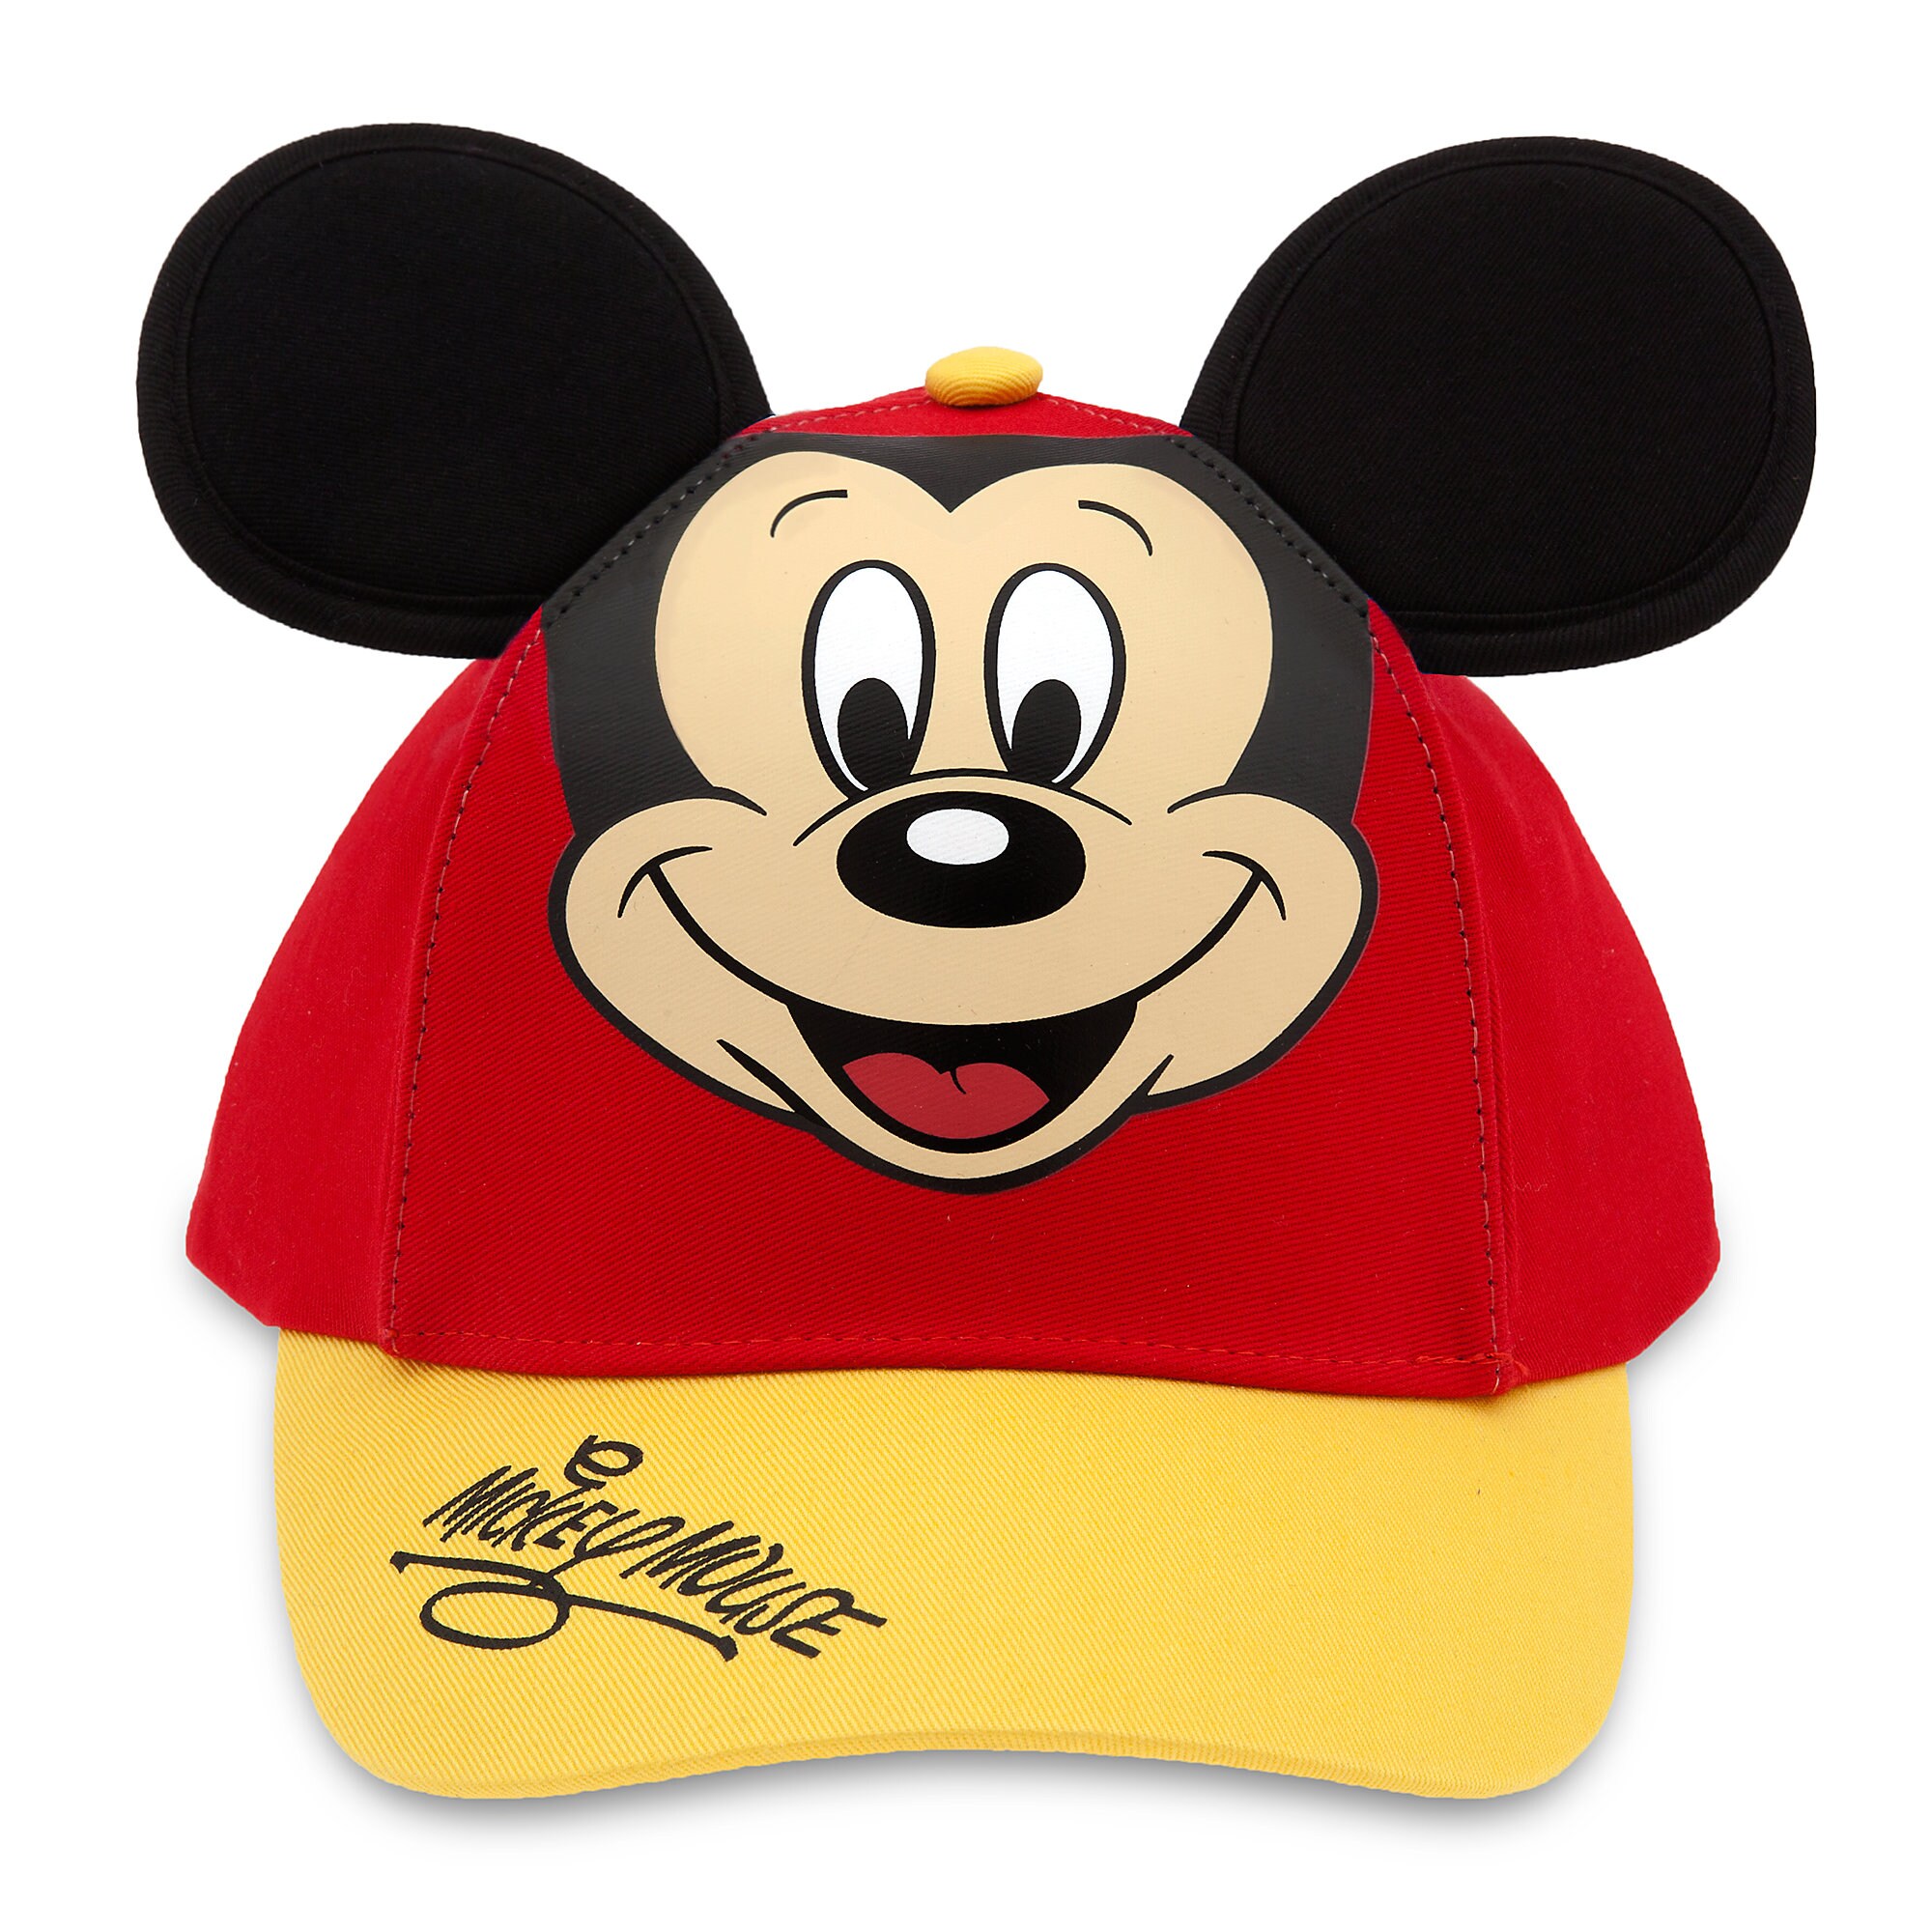 Mickey Mouse Baseball Cap for Kids - Red/Gold